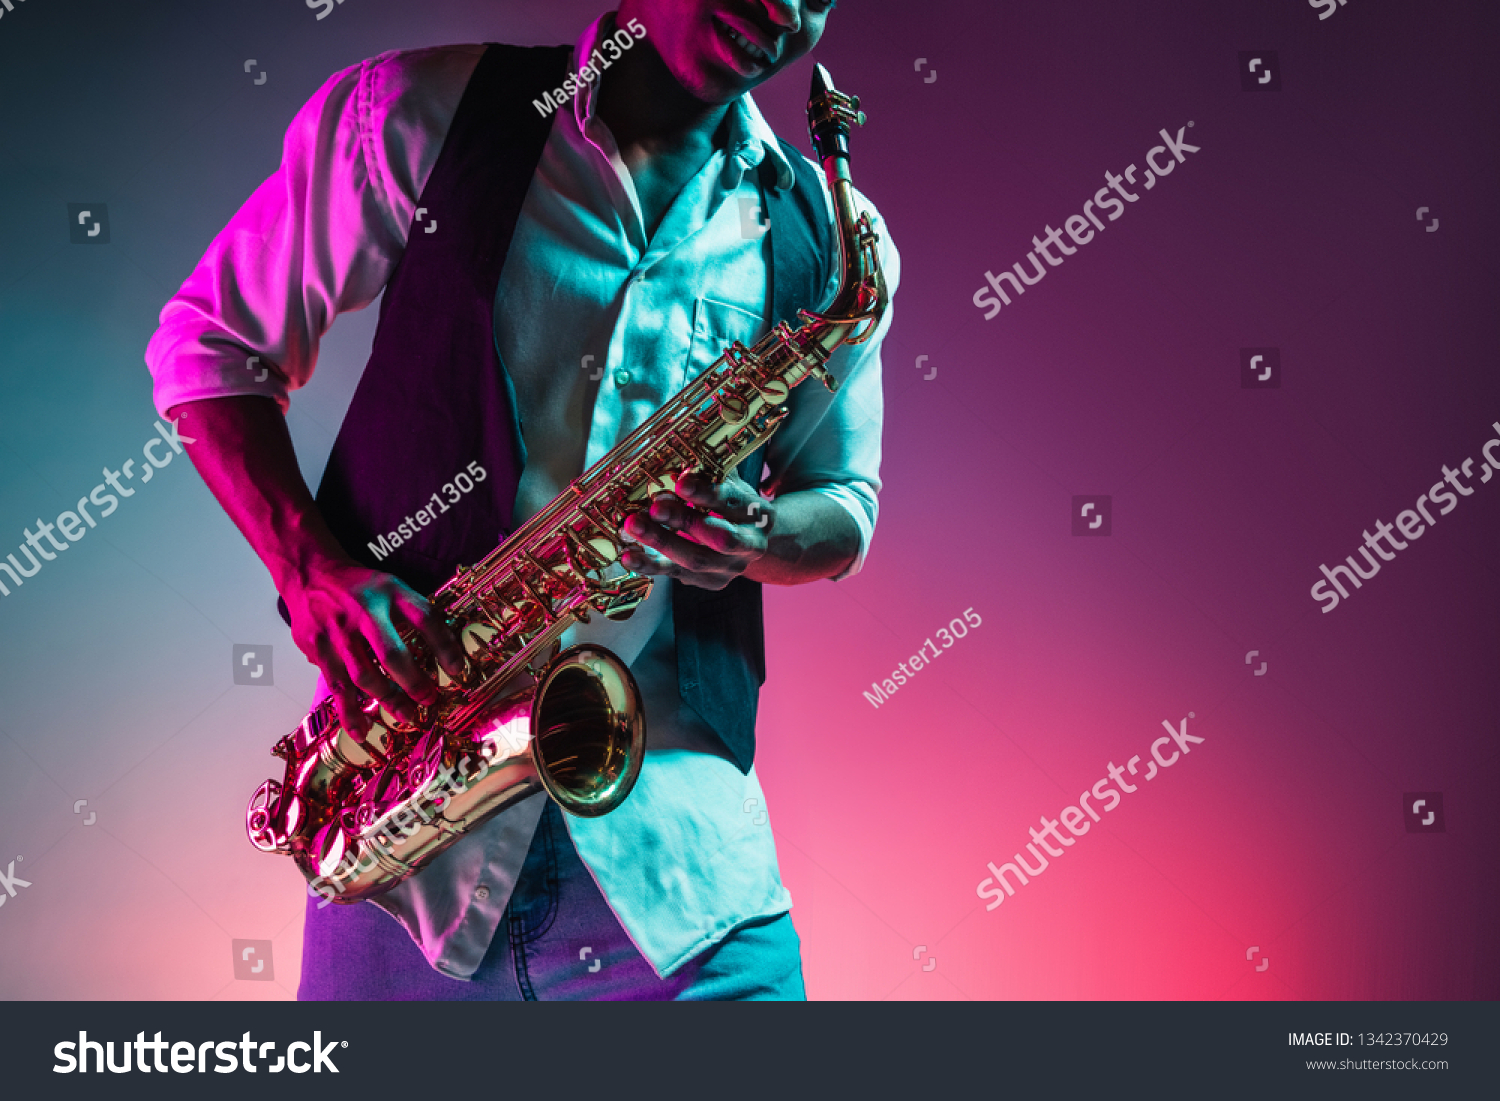 African American handsome jazz musician playing the saxophone in the studio on a neon background. Music concept. Young joyful attractive guy improvising. Close-up retro portrait. #1342370429